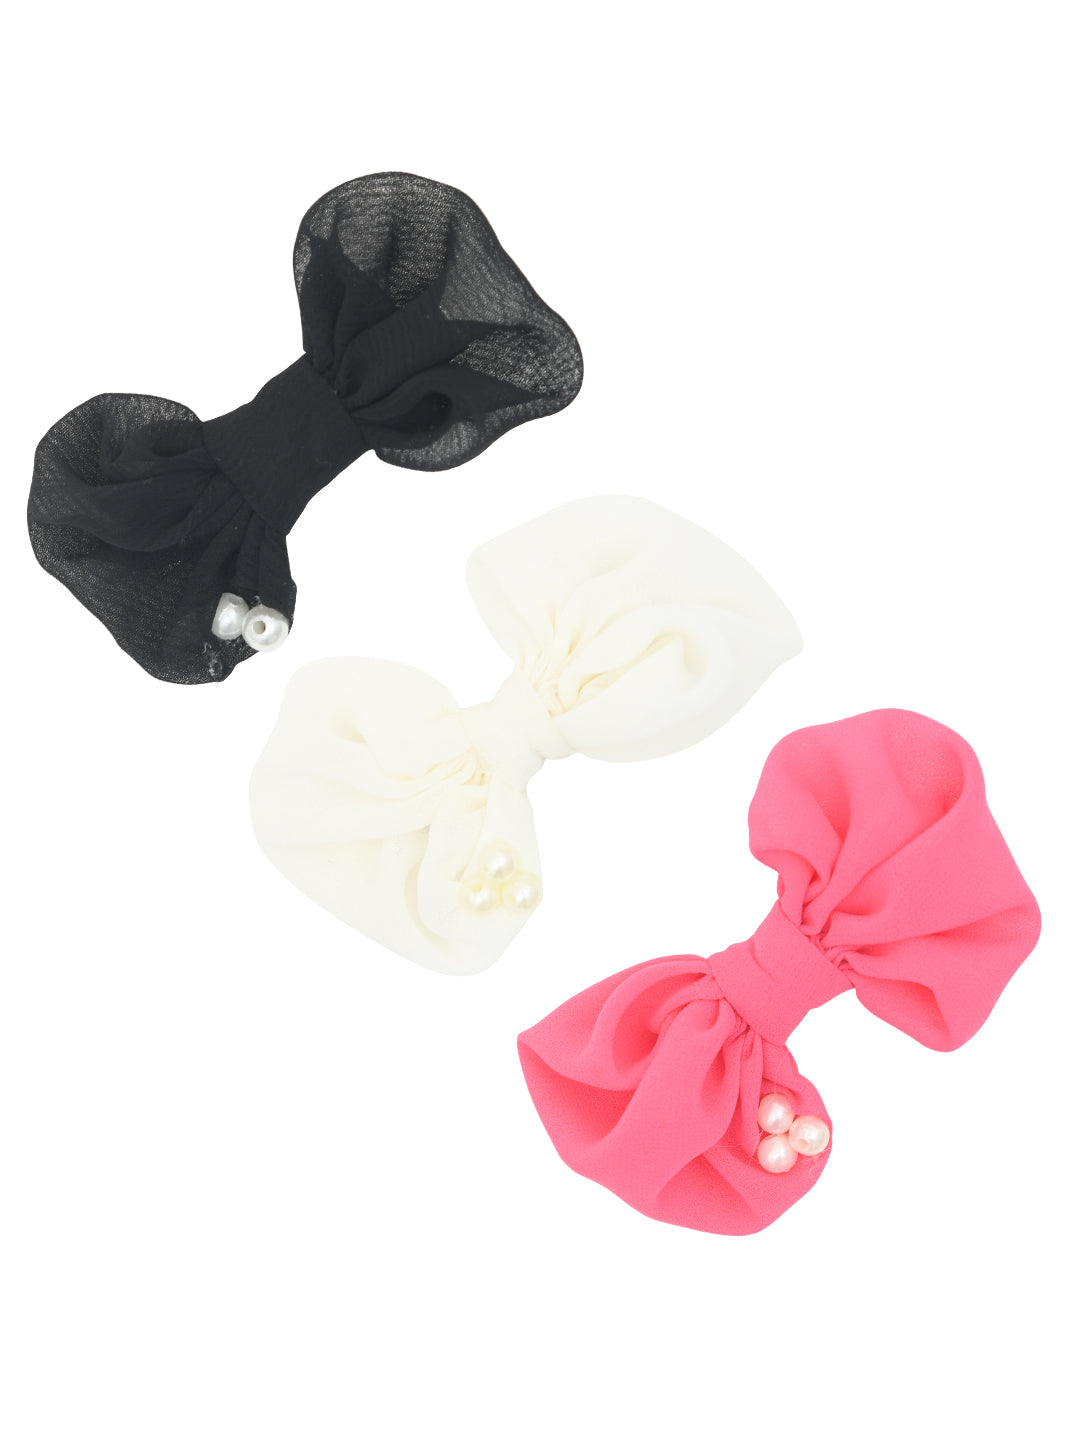 Set of 3 Bow Hair Clips for Girls